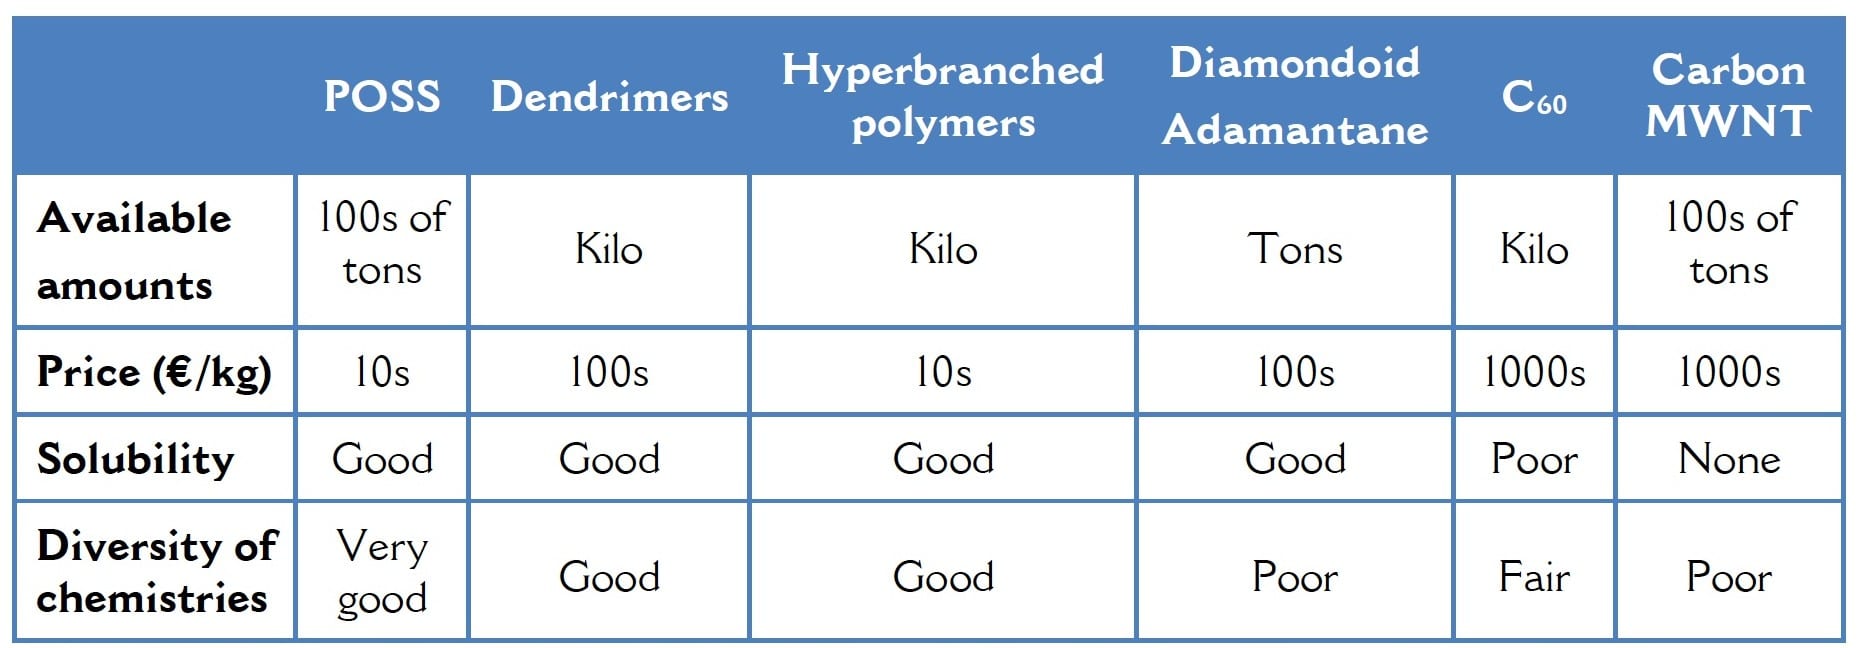 POSS Compared To Other Molecular Fillers Availability and Price